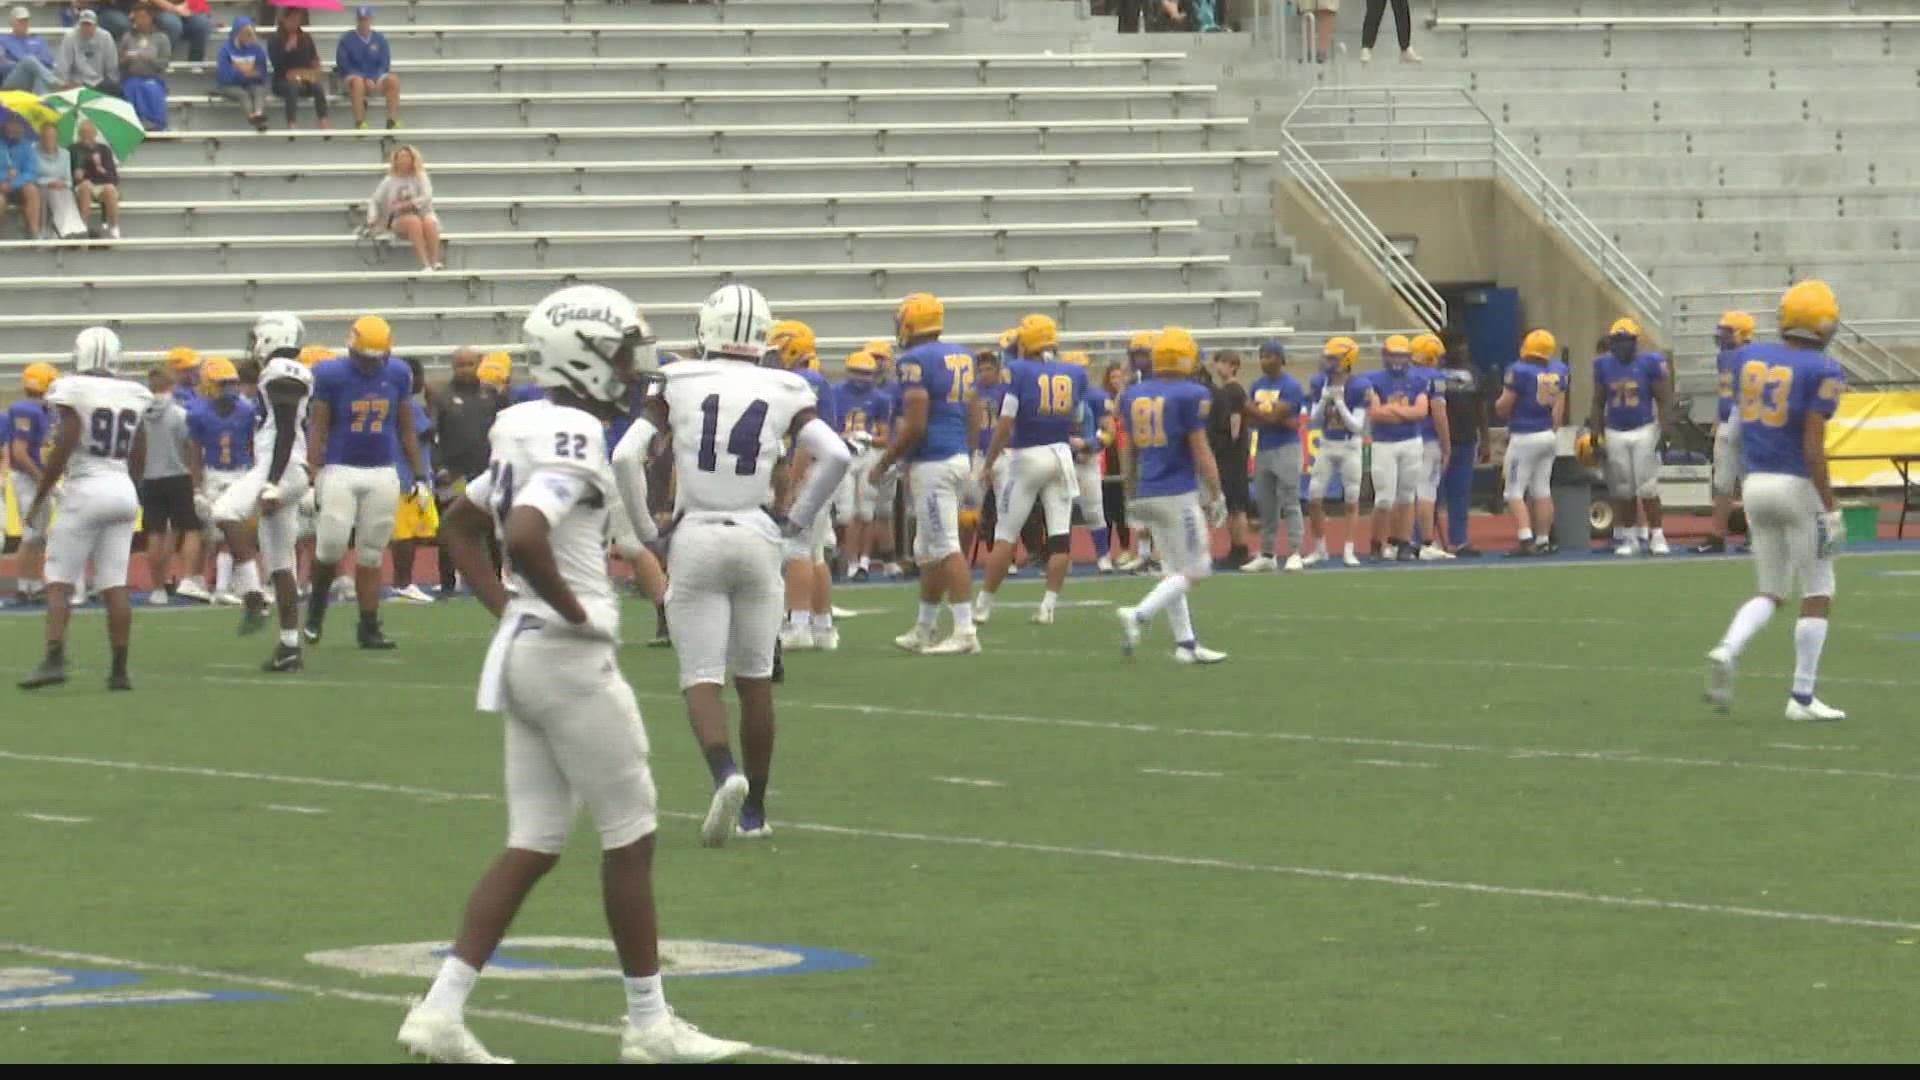 The freshman game between Ben Davis and Carmel was scheduled Saturday as coaches, players and fans tried to move beyond the shooting at Friday's game.